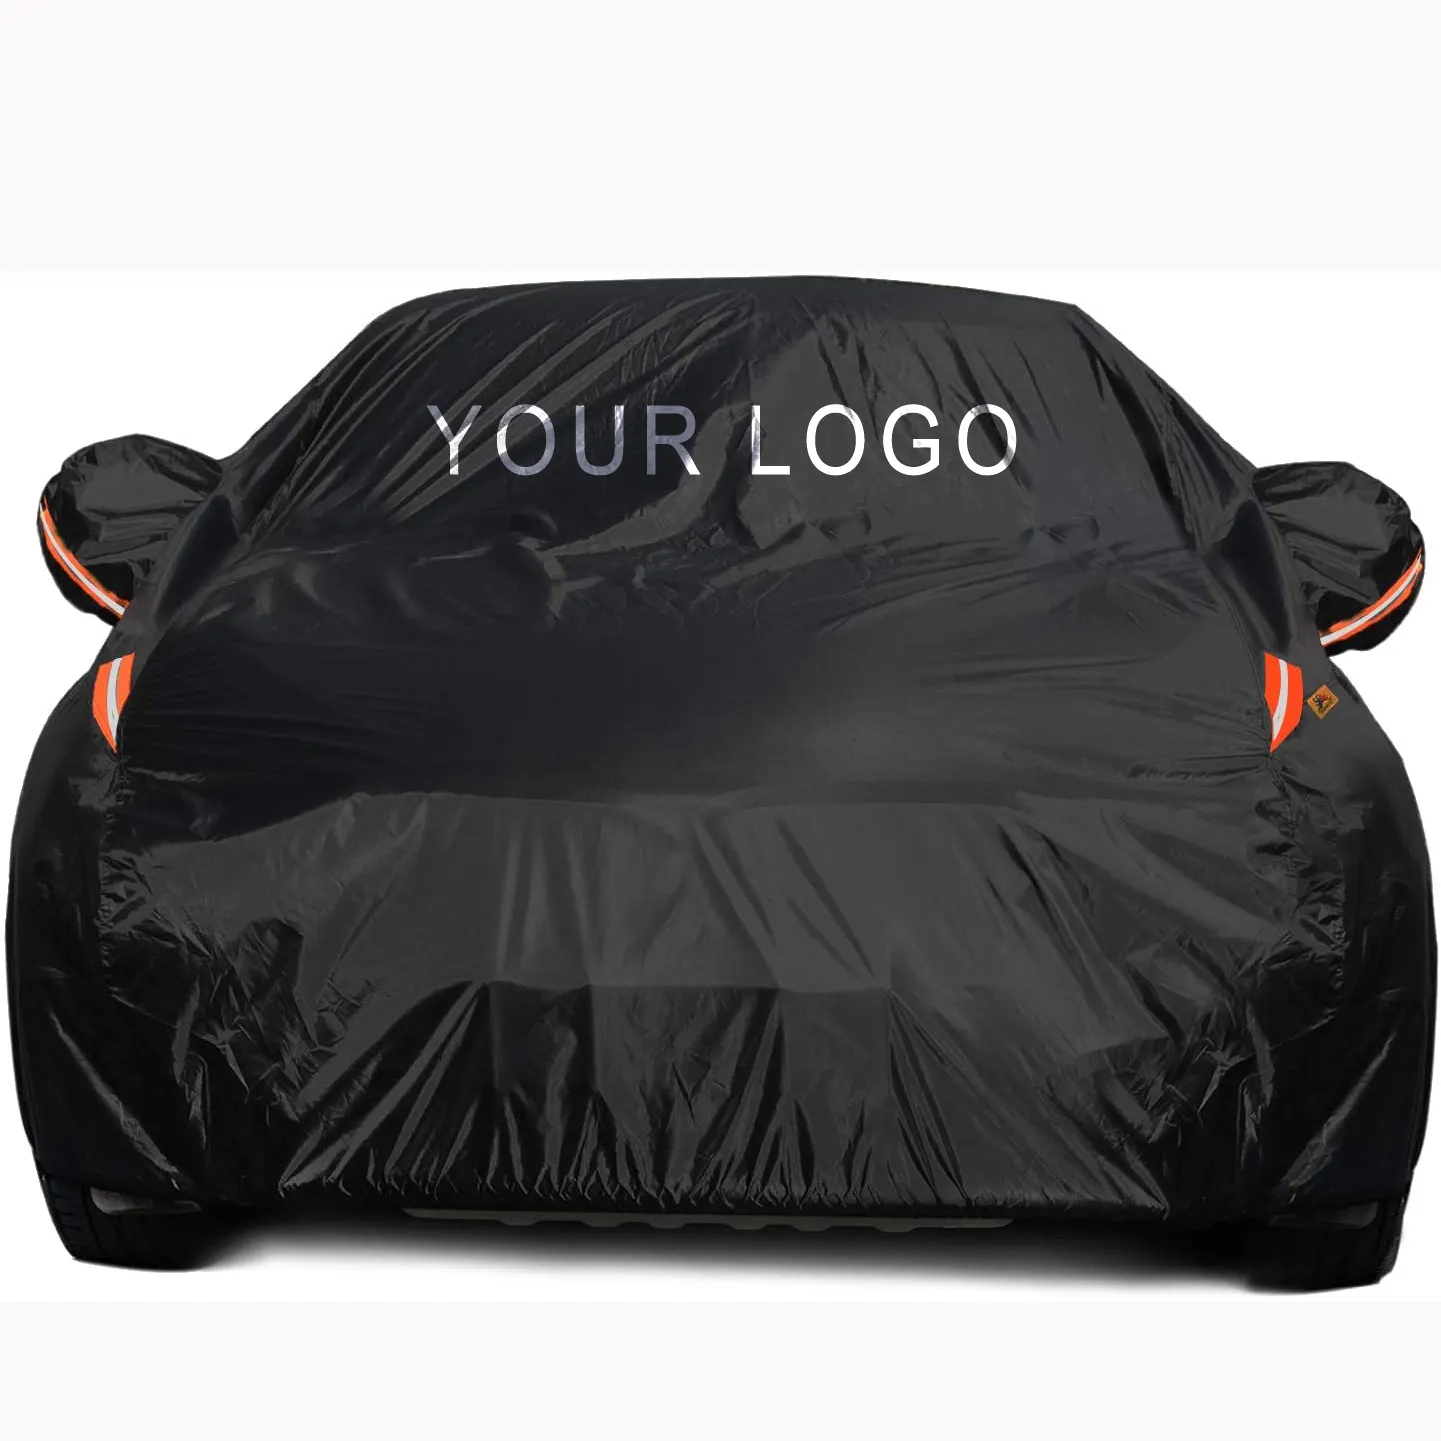 XMB Black All Weather Heavy duty Snowproof UV padded hail Protection Windproof Outdoor Full car Cover with cotton